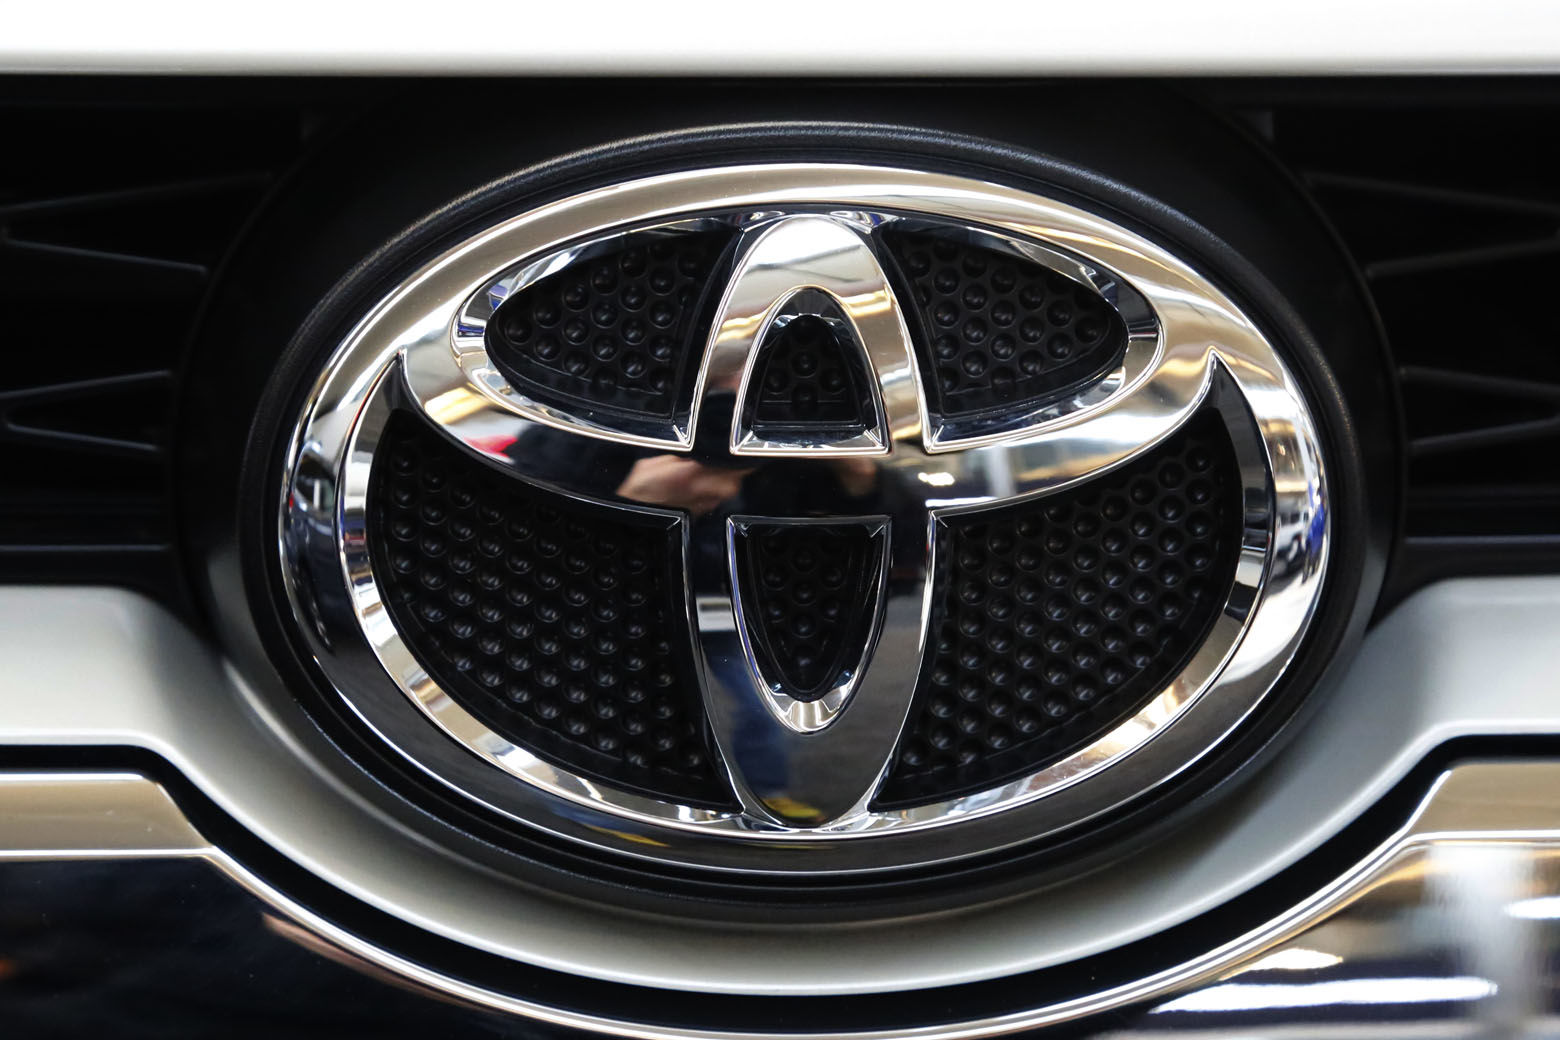 This is the Toyota logo on the grill of a 2018 Toyota 4Runner on display at the Pittsburgh Auto Show Thursday, Feb. 15, 2018. (AP Photo/Gene J. Puskar)